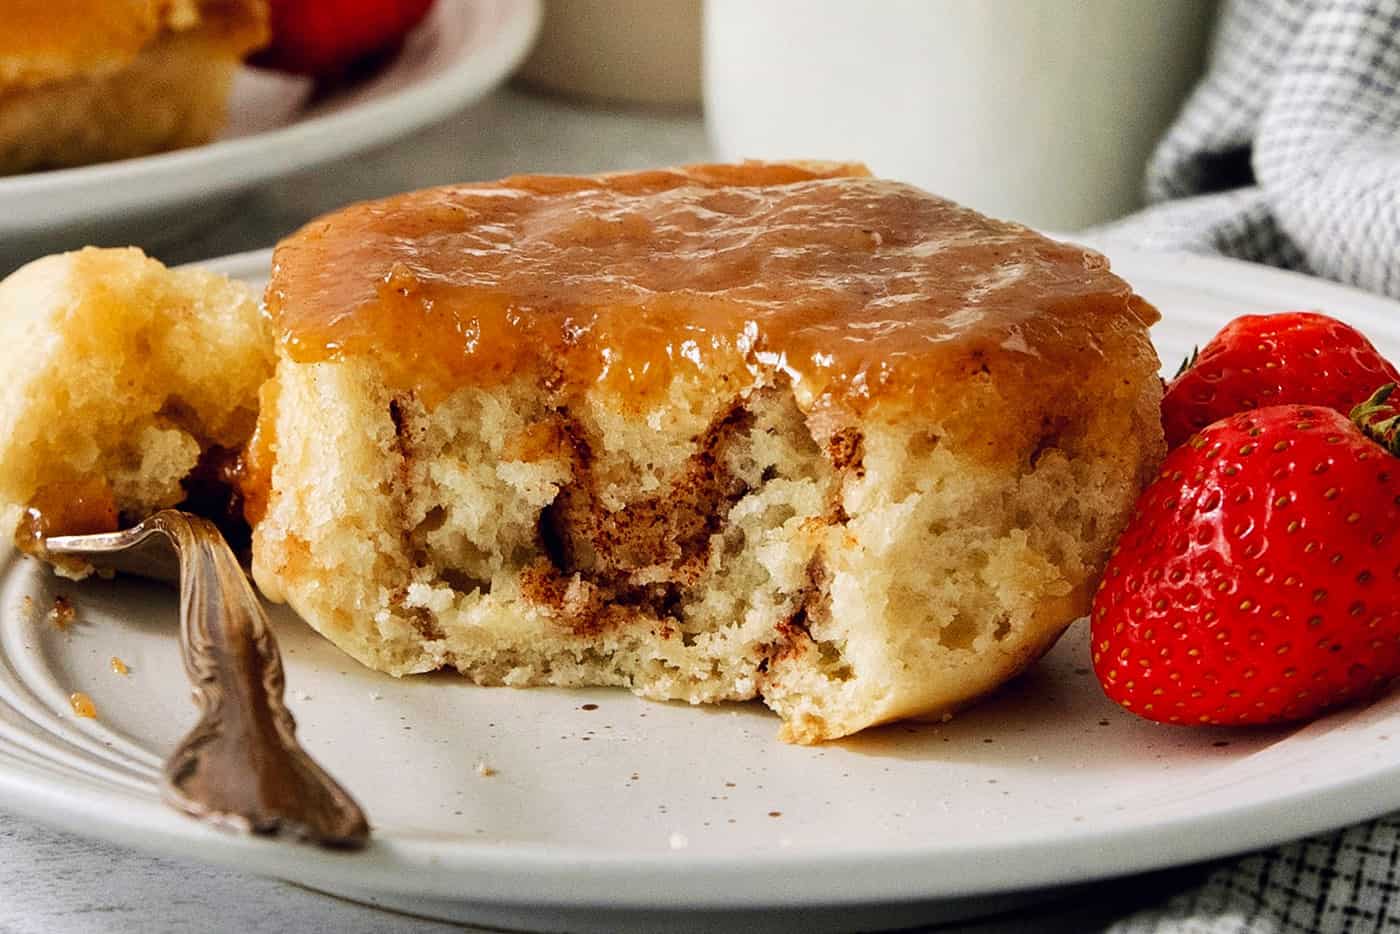 A caramel roll on a white plate with a piece cut out, a fork to its left, and strawberries to the right.